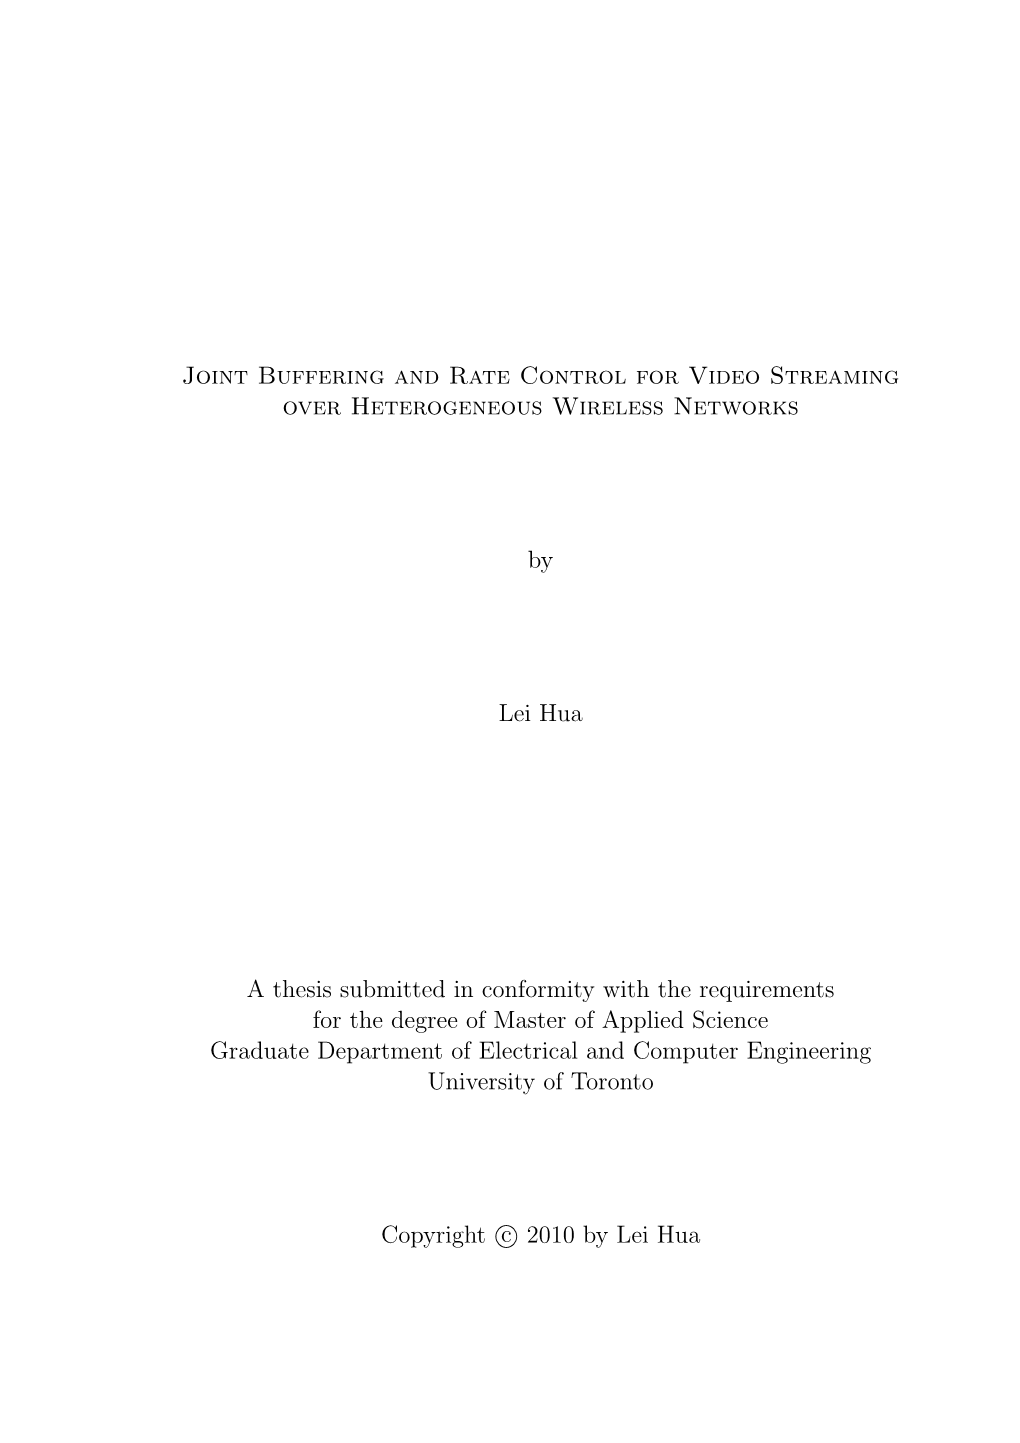 Joint Buffering and Rate Control for Video Streaming Over Heterogeneous Wireless Networks by Lei Hua a Thesis Submitted in Confo